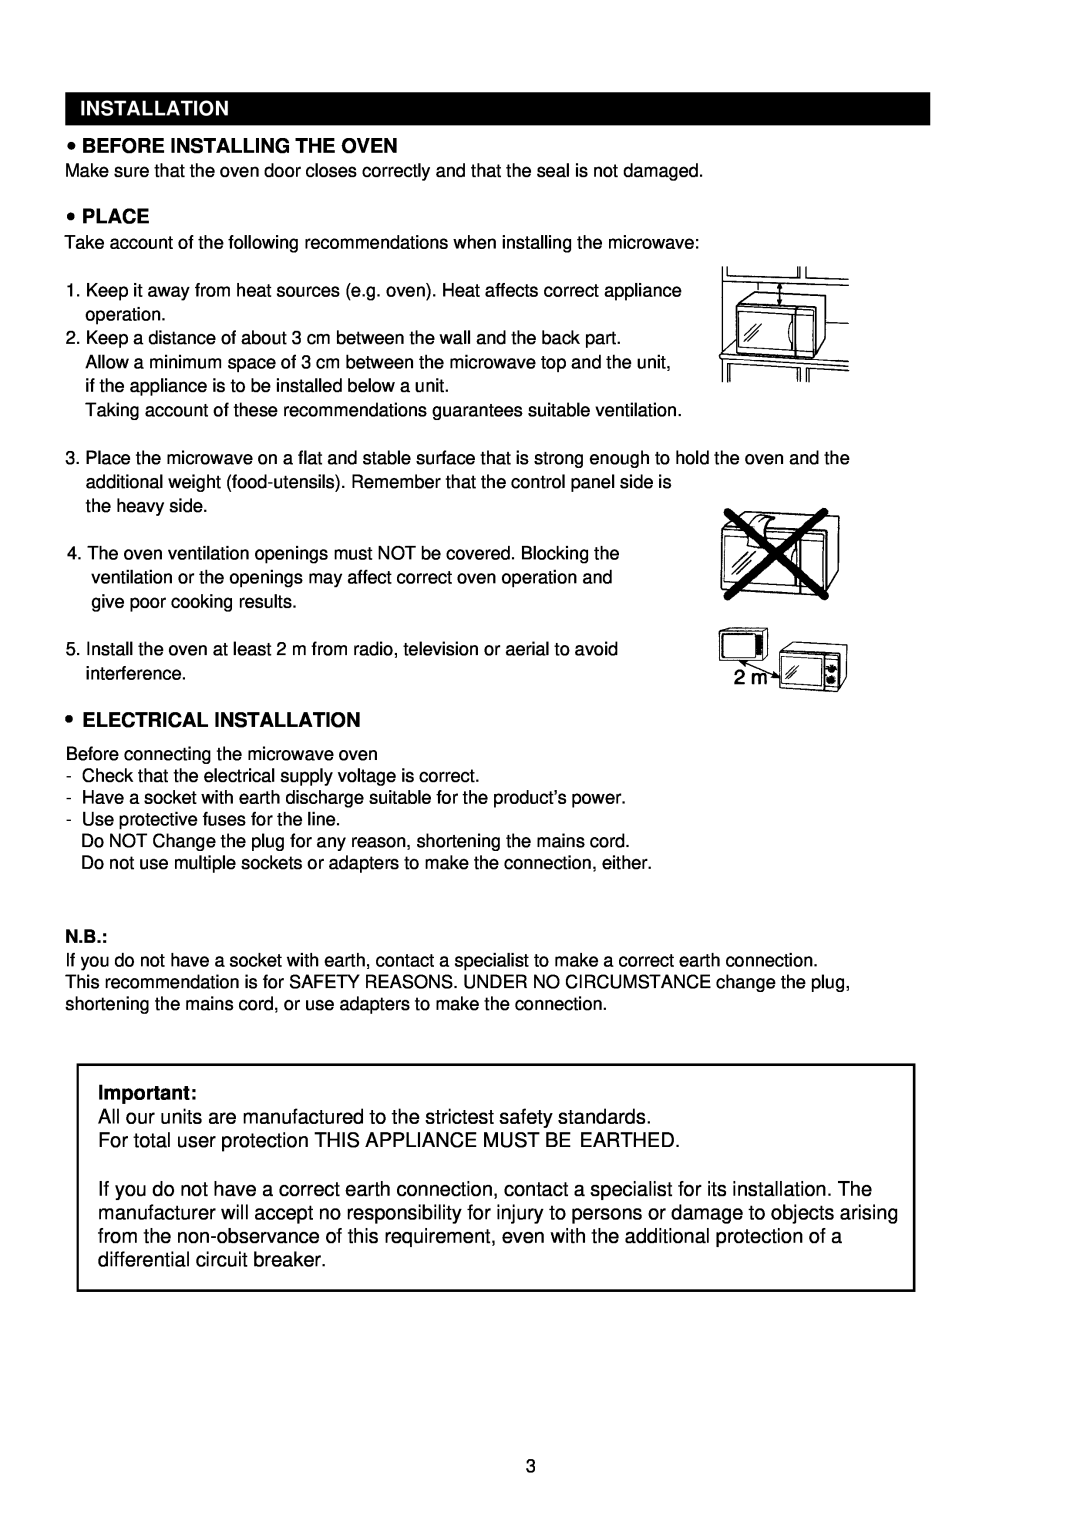 Palsonic PMO-758 manual Before Installing The Oven, Place, Electrical Installation 